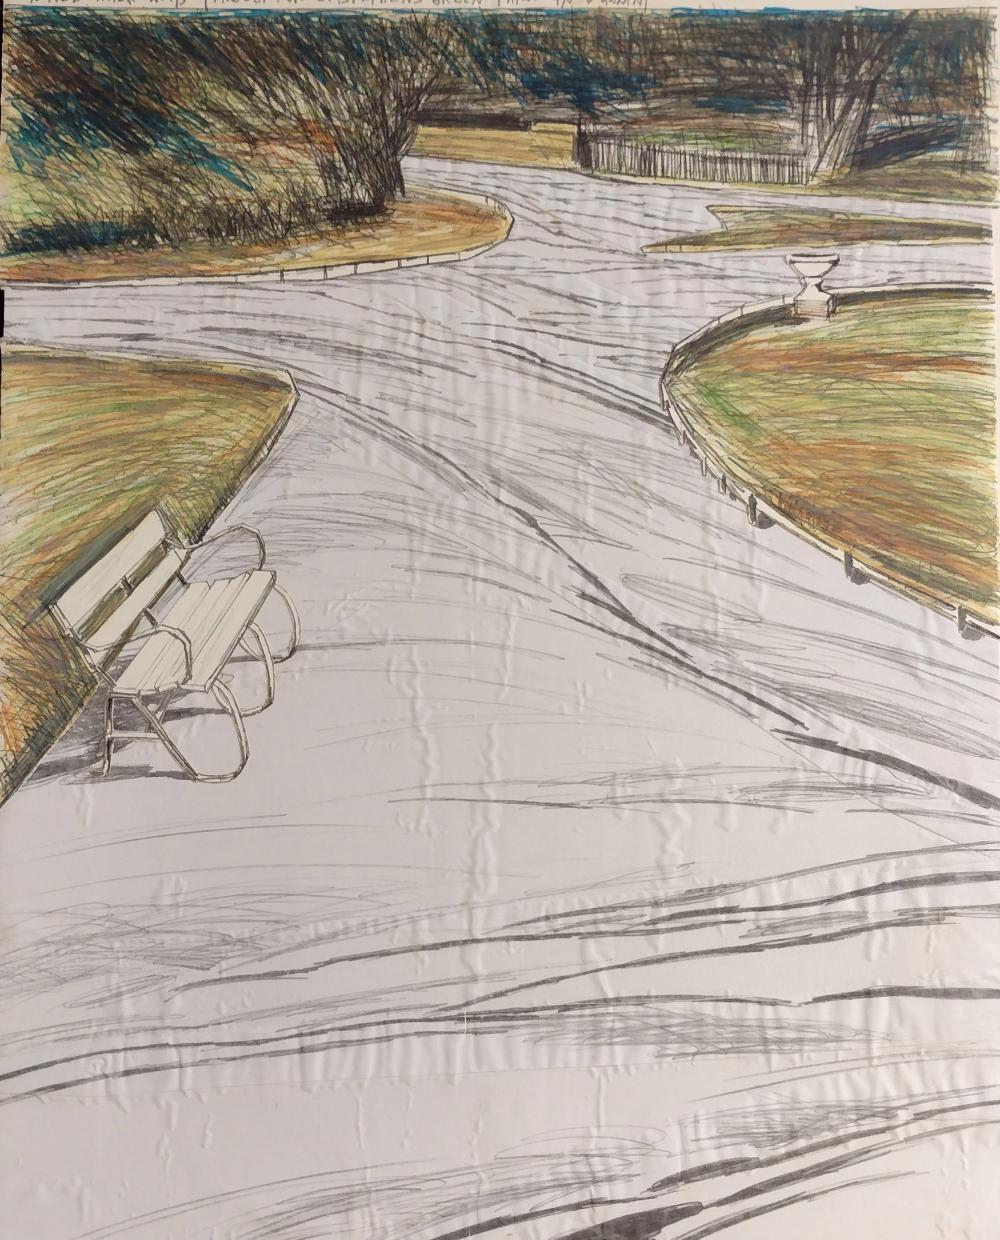 Christo and Jeanne-Claude
Wrapped Walk Ways, 1983
Lithograph on Arches Cover White mounted on museum board, with collage of white cloth
28 × 44 in. - 71 × 112 cm
Edition: 68/100
Signed, Numbered and dated in pencil
Publisher: Schellmann
Reference #: